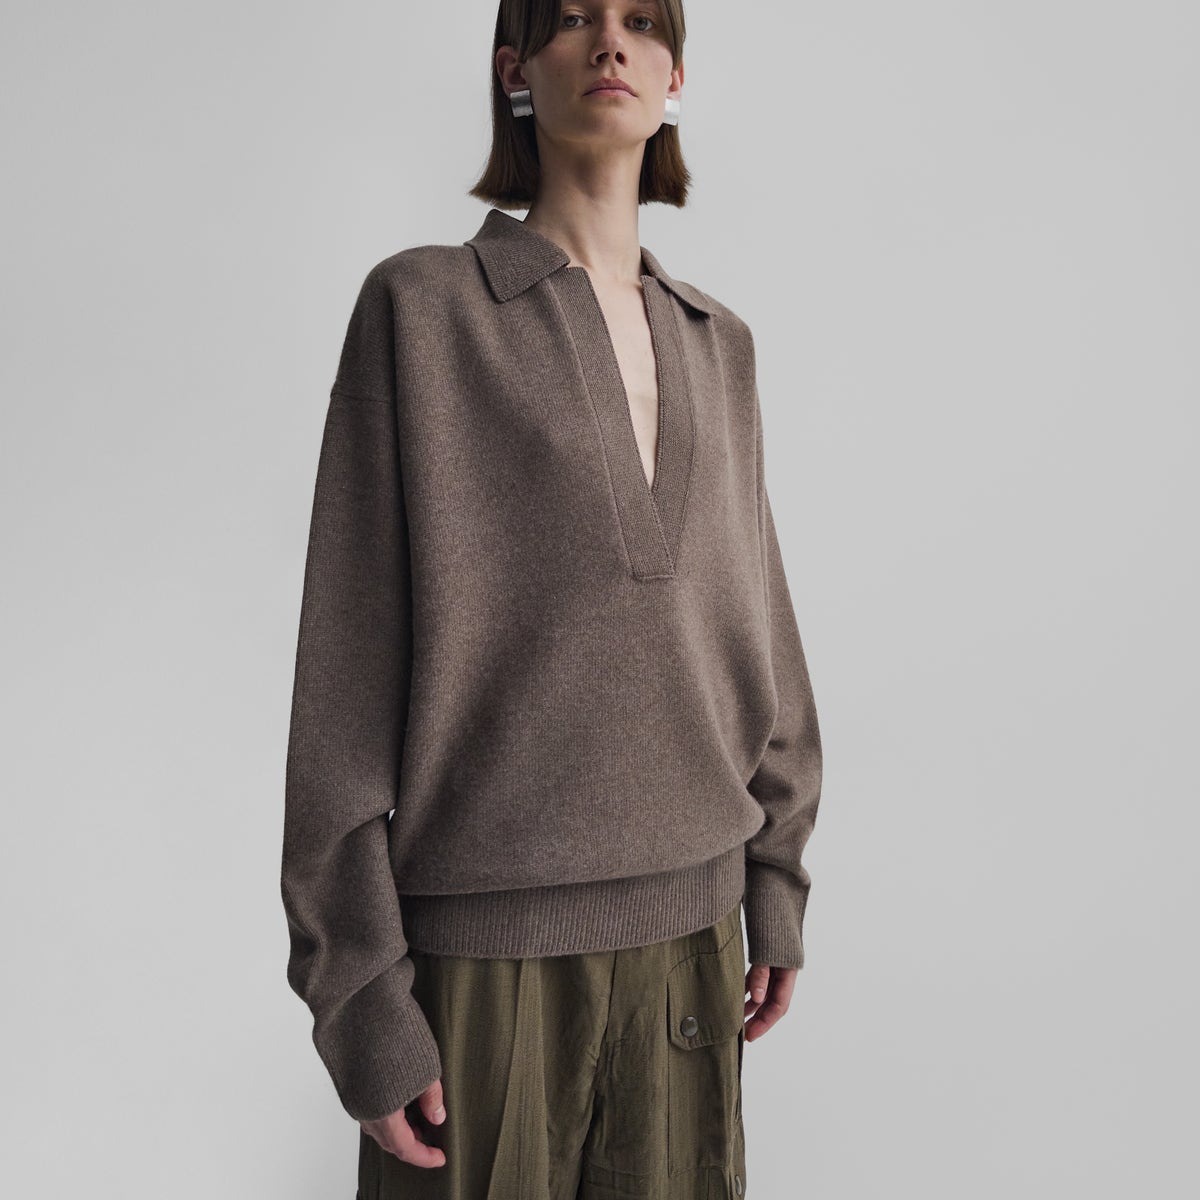 Phoebe Philo's New Line Is Every Editor's Dream Wardrobe | Who What Wear